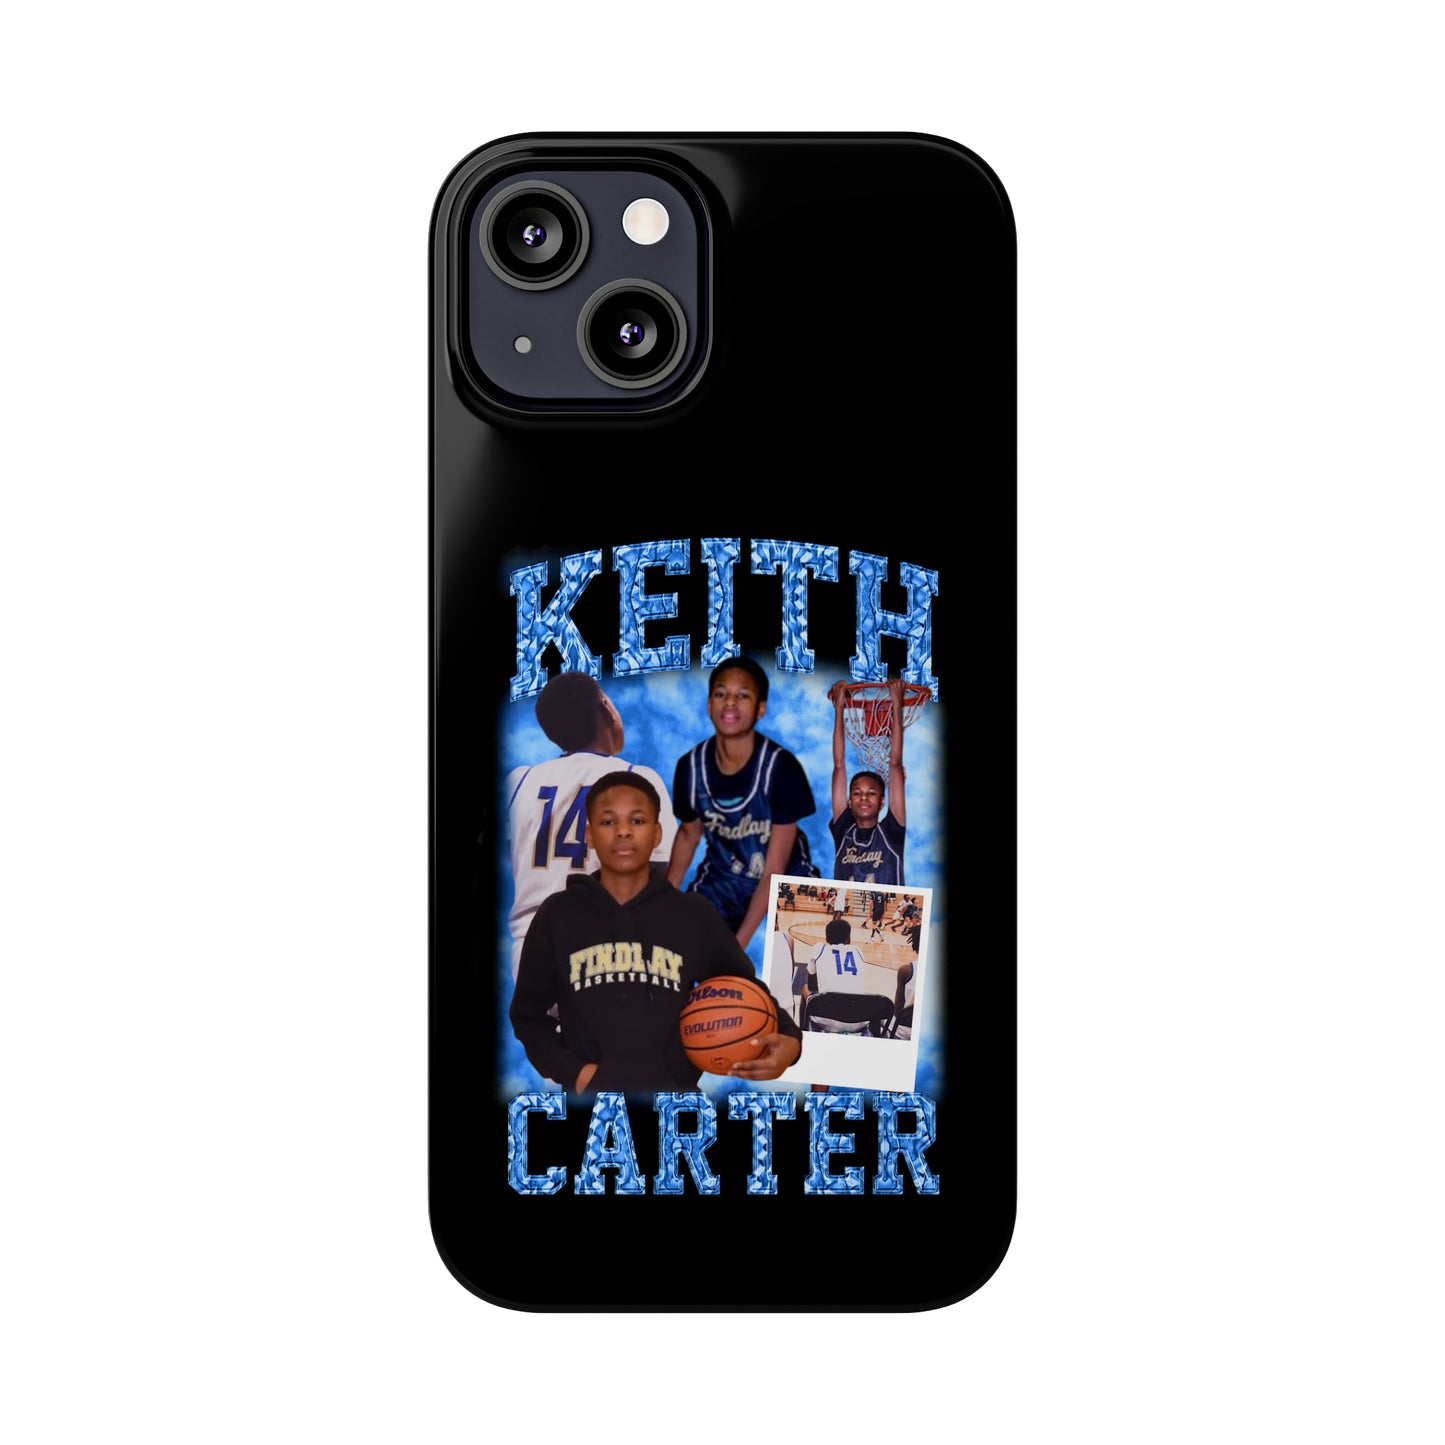 Keith Carter Slim Phone Cases